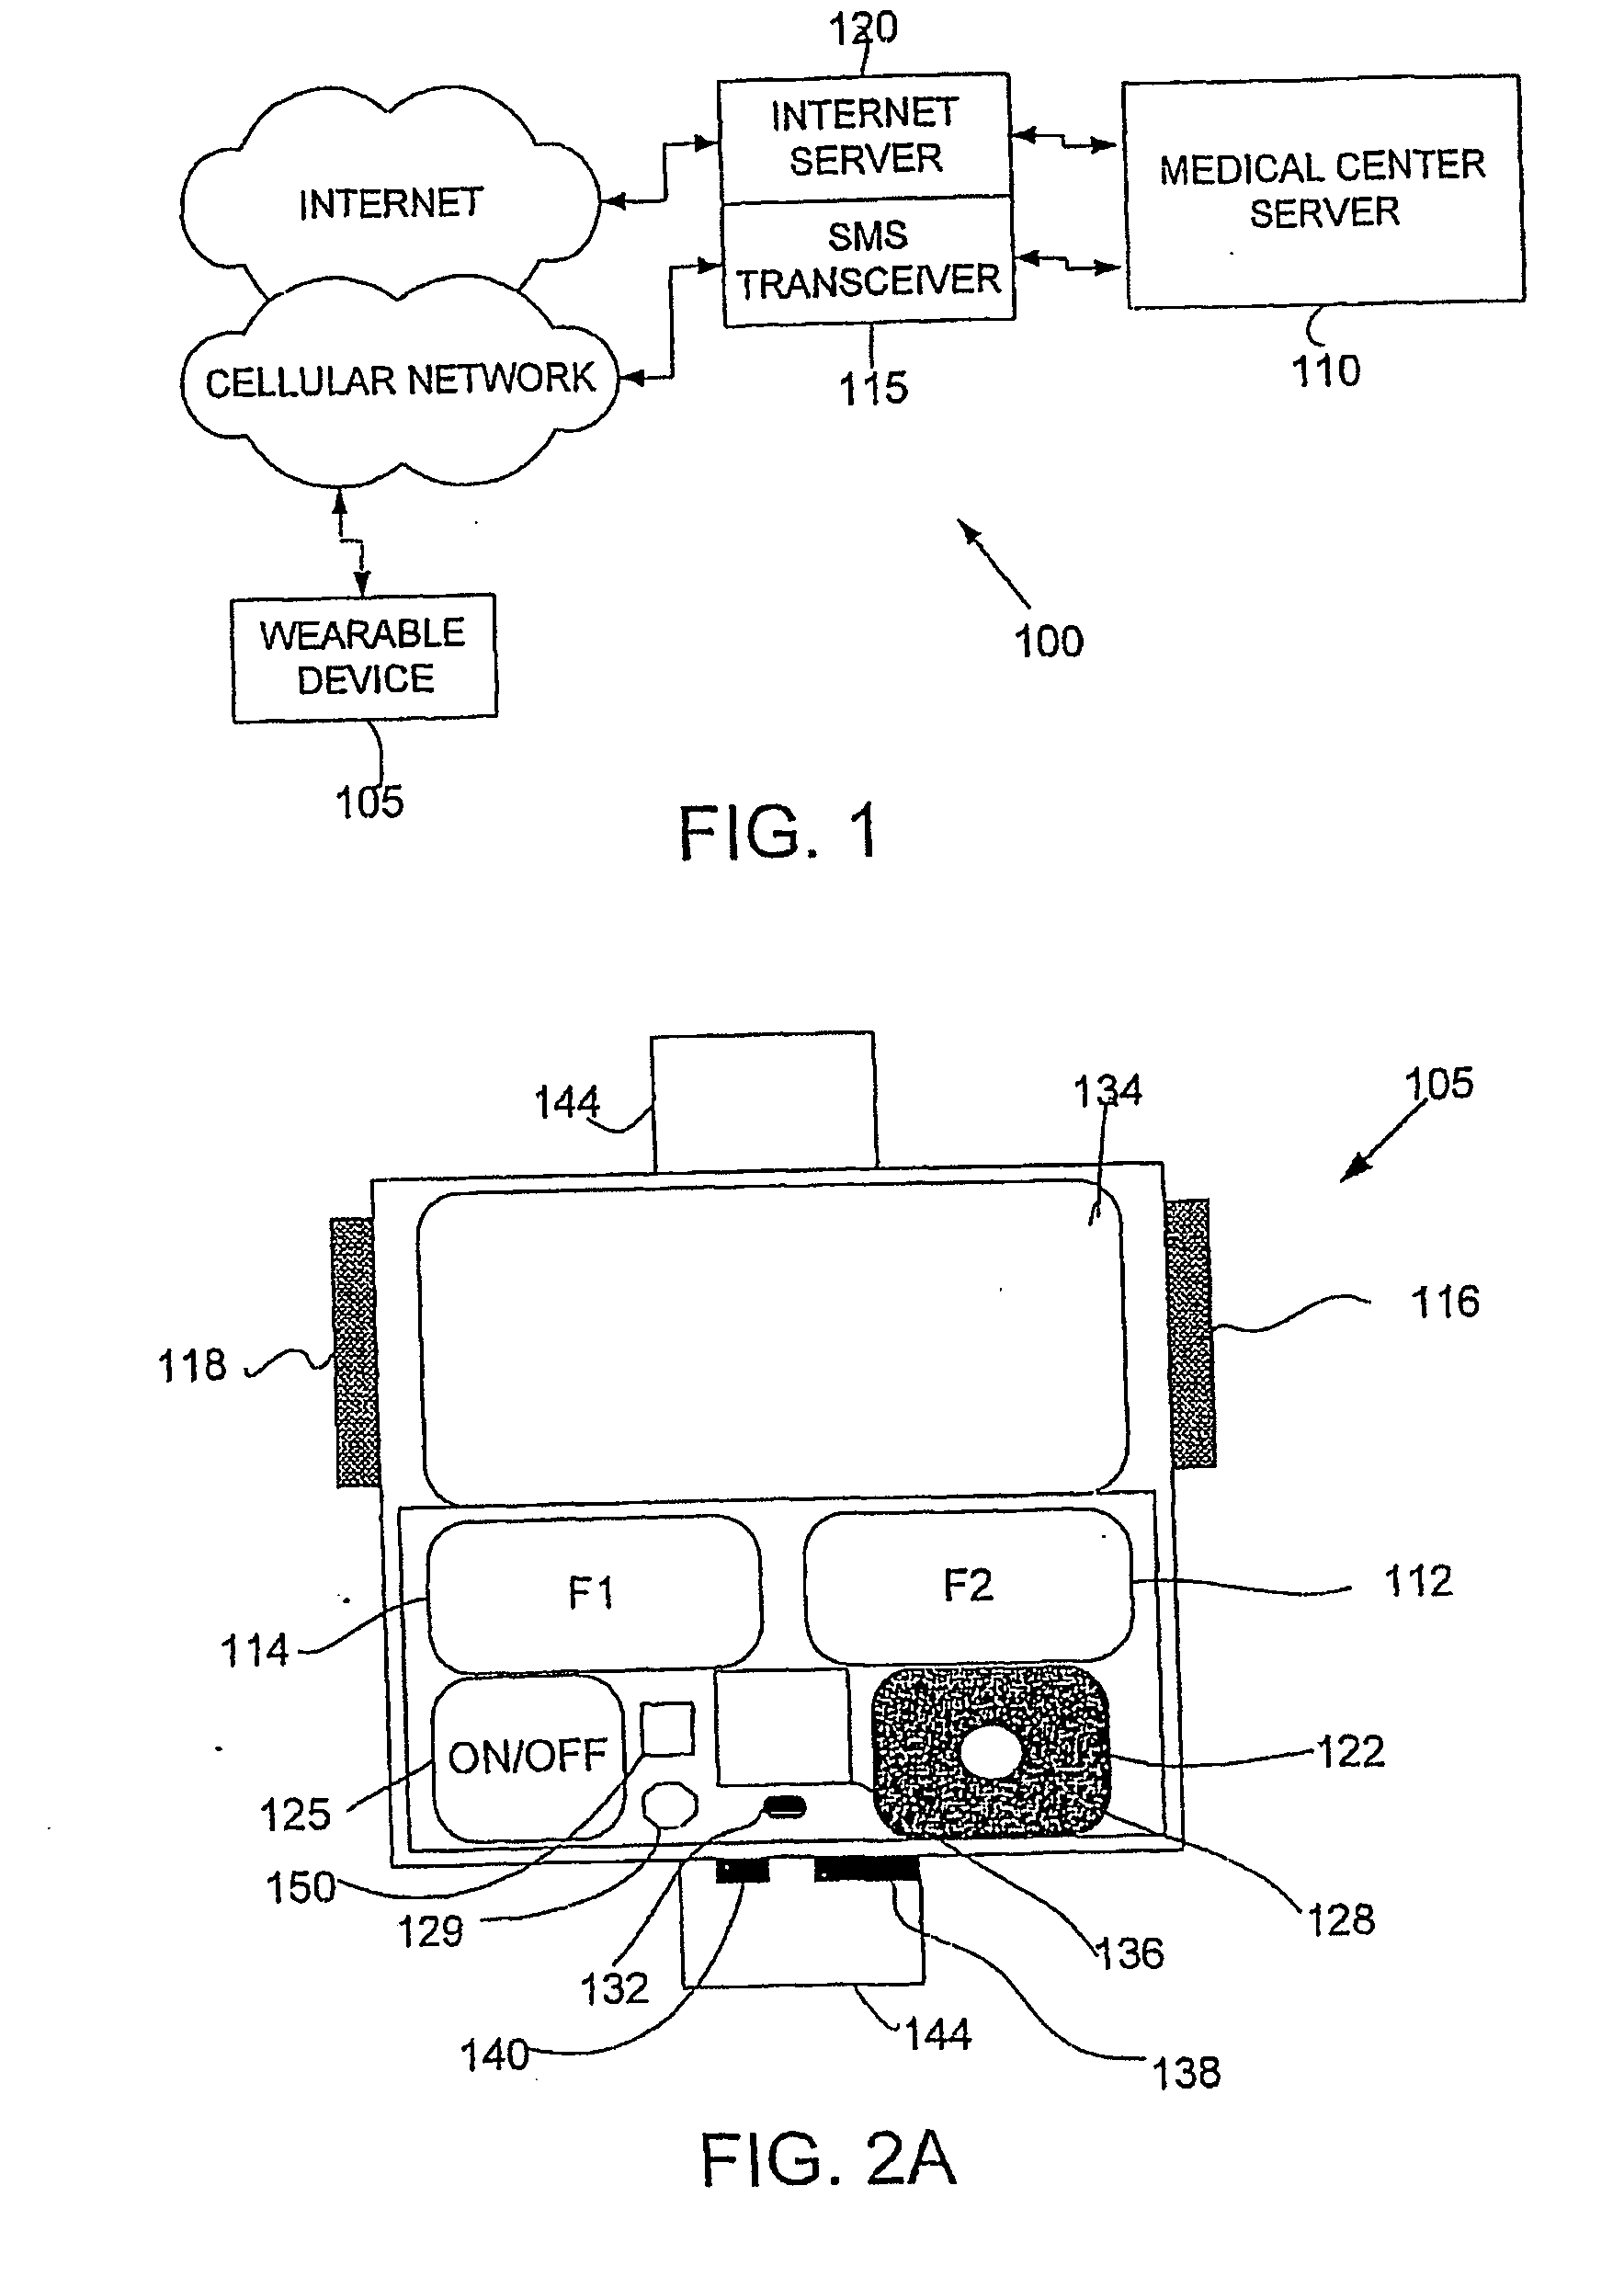 Wearable Device, System and Method for Measuring Physiological and/or Environmental Parameters